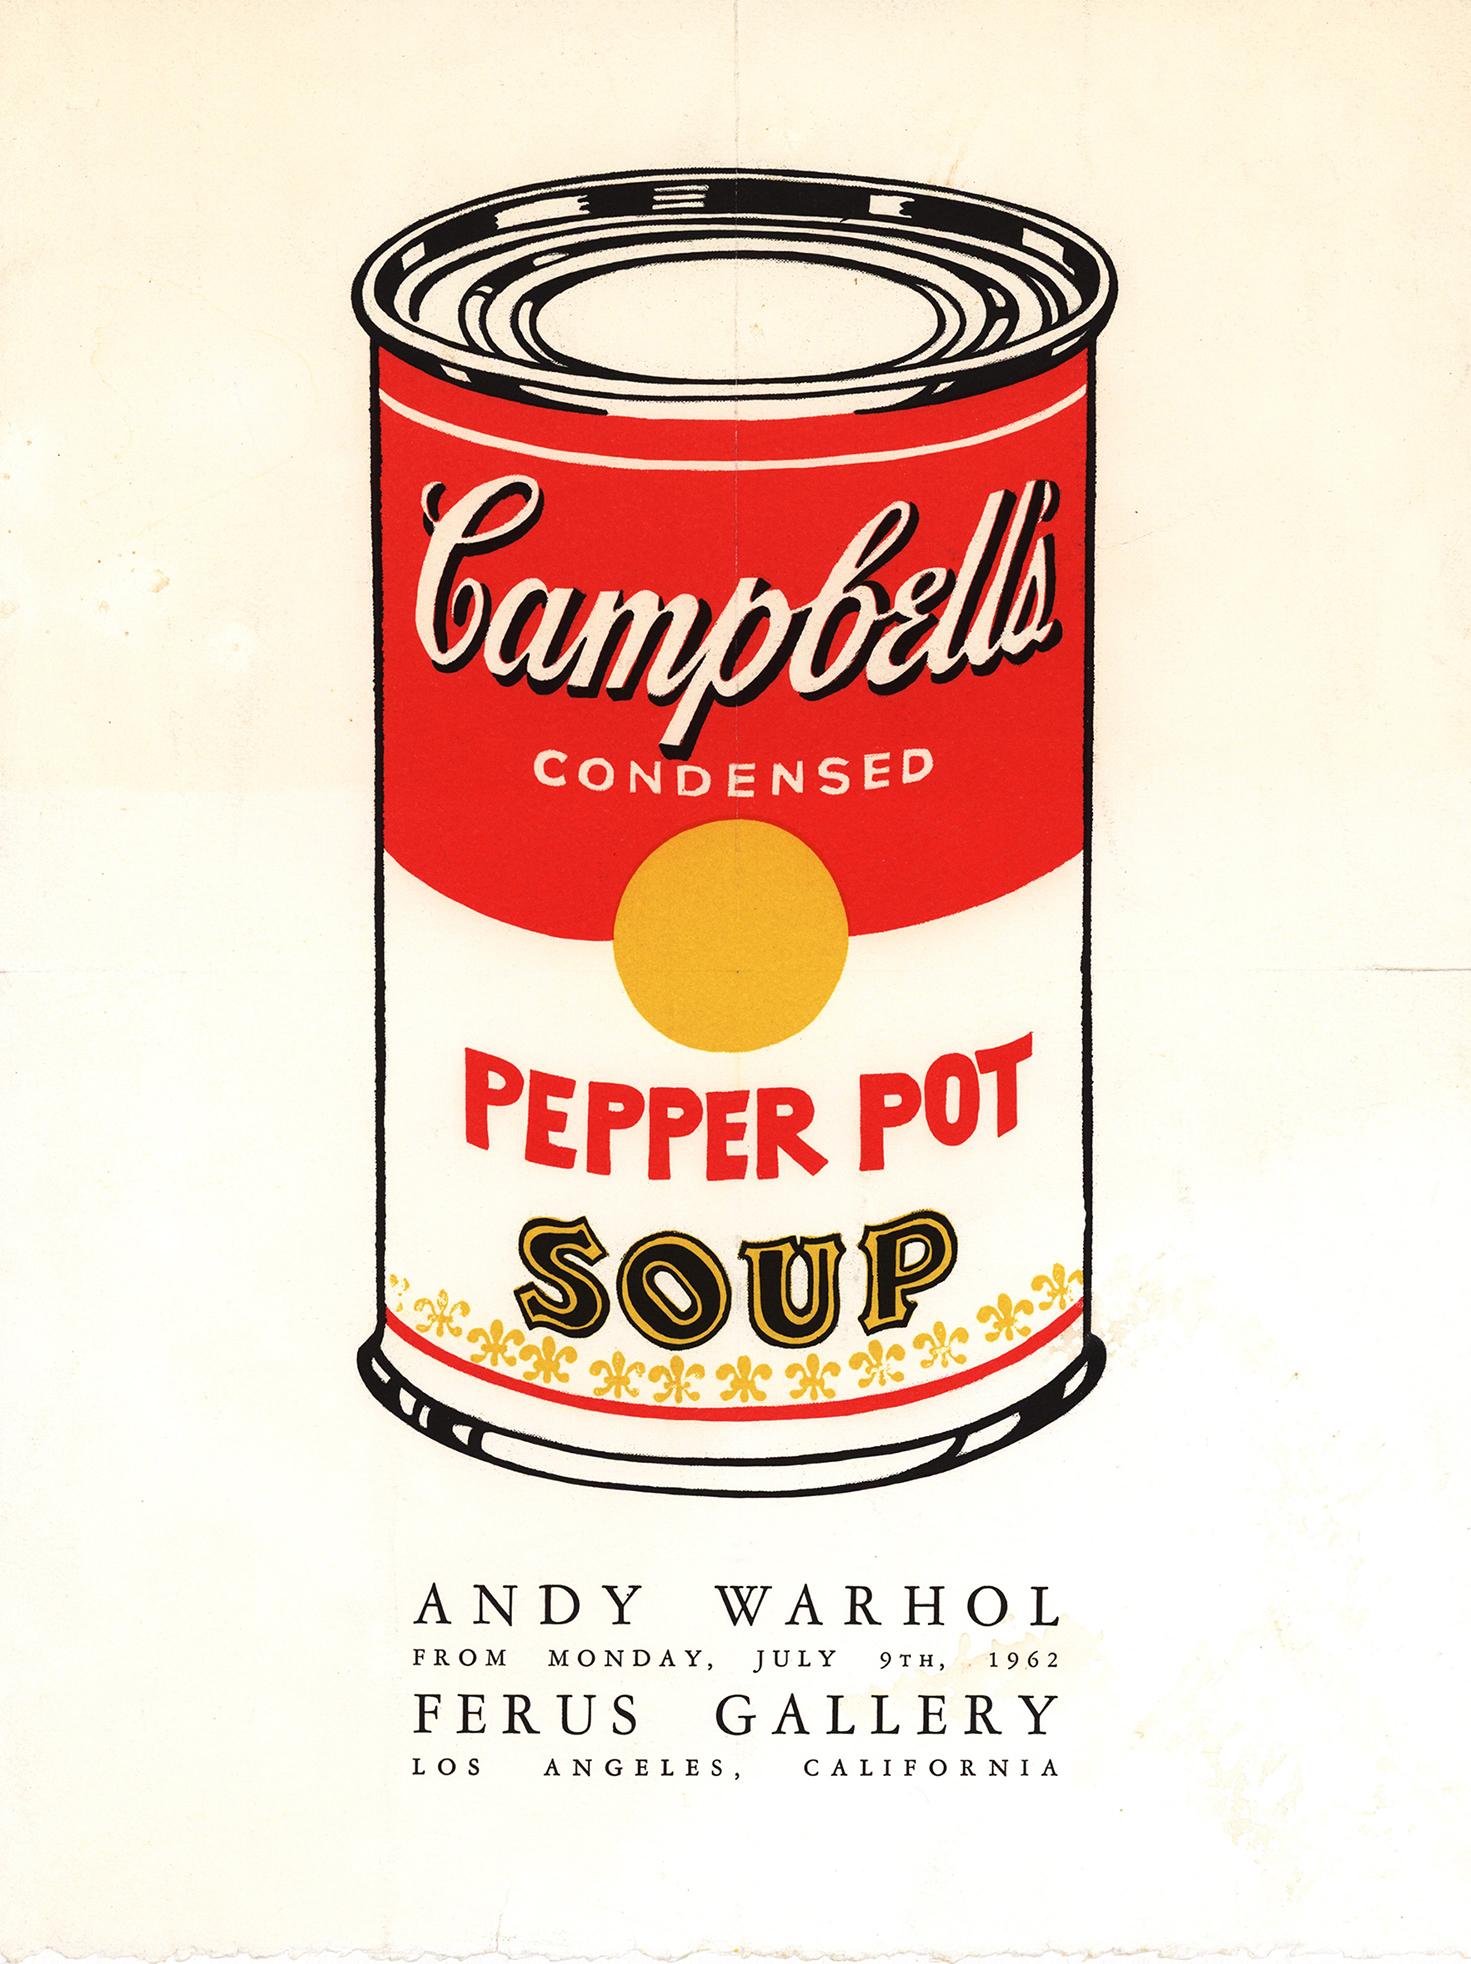 Andy Warhol Pepper Pot (Andy Warhol Ferus Gallery invitation 1962):

The rare much sought-after, original invitation to Andy Warhol's 1962 Ferus Gallery exhibition (Los Angeles, California July 9, 1962) - the very exhibition that would debut